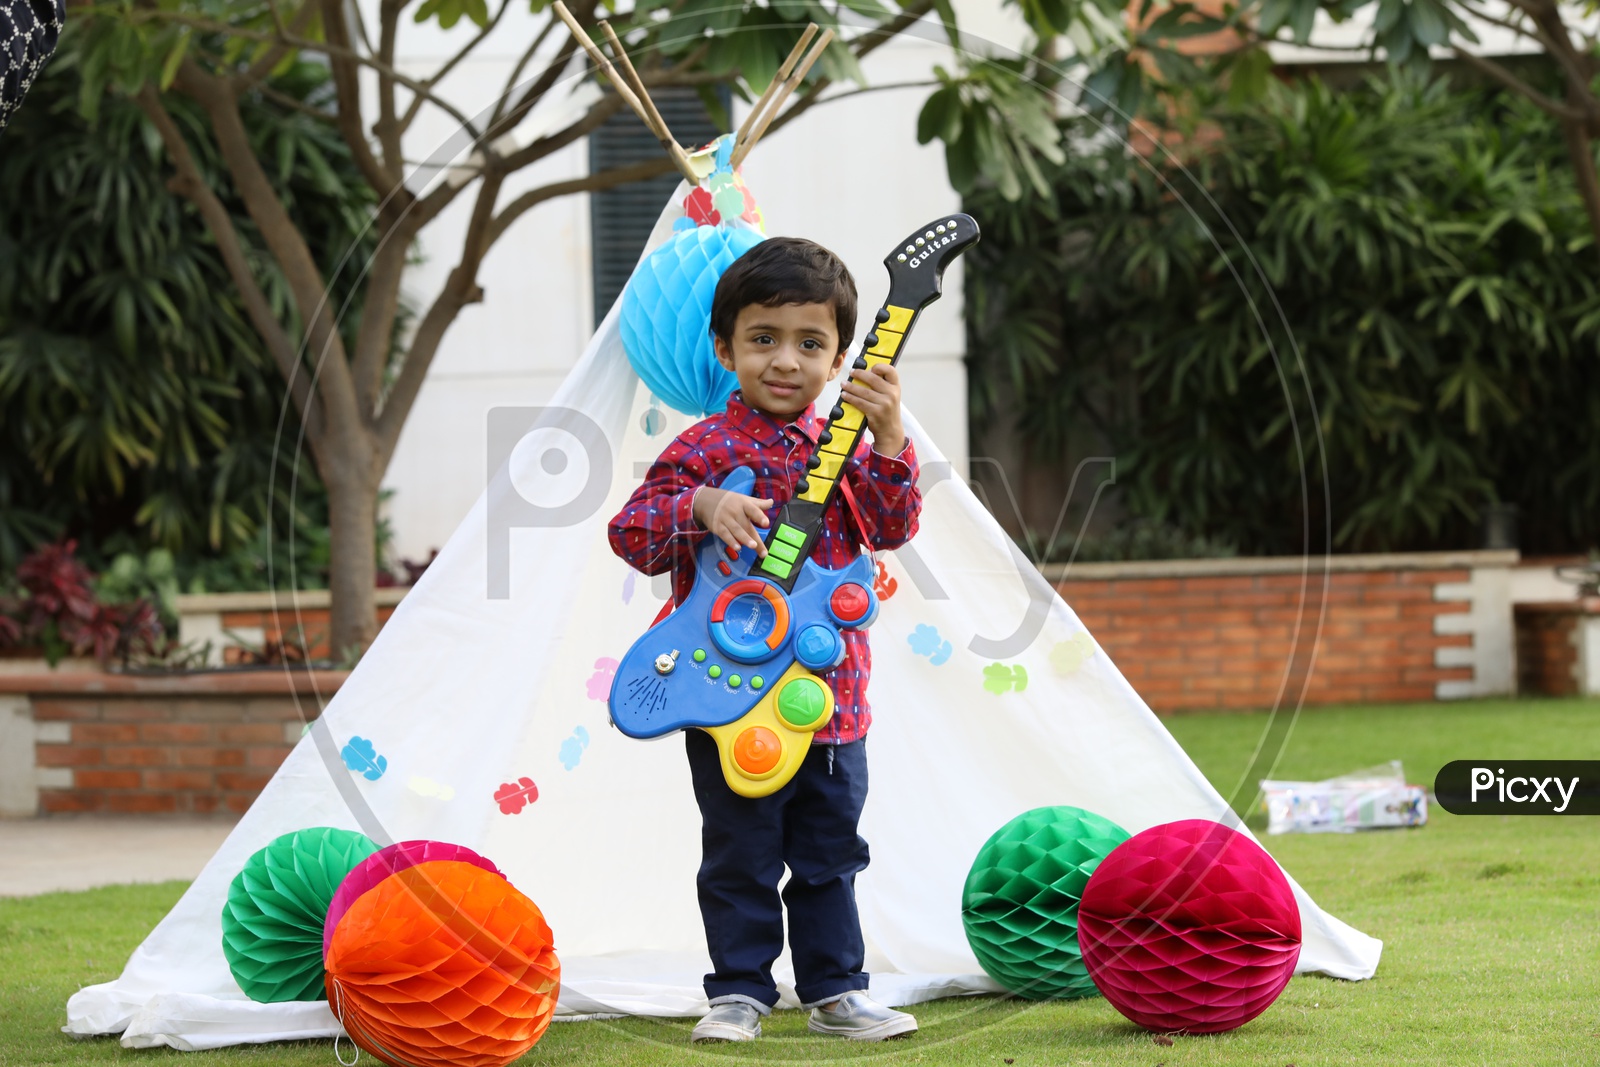 Little boy Playing toy guitar